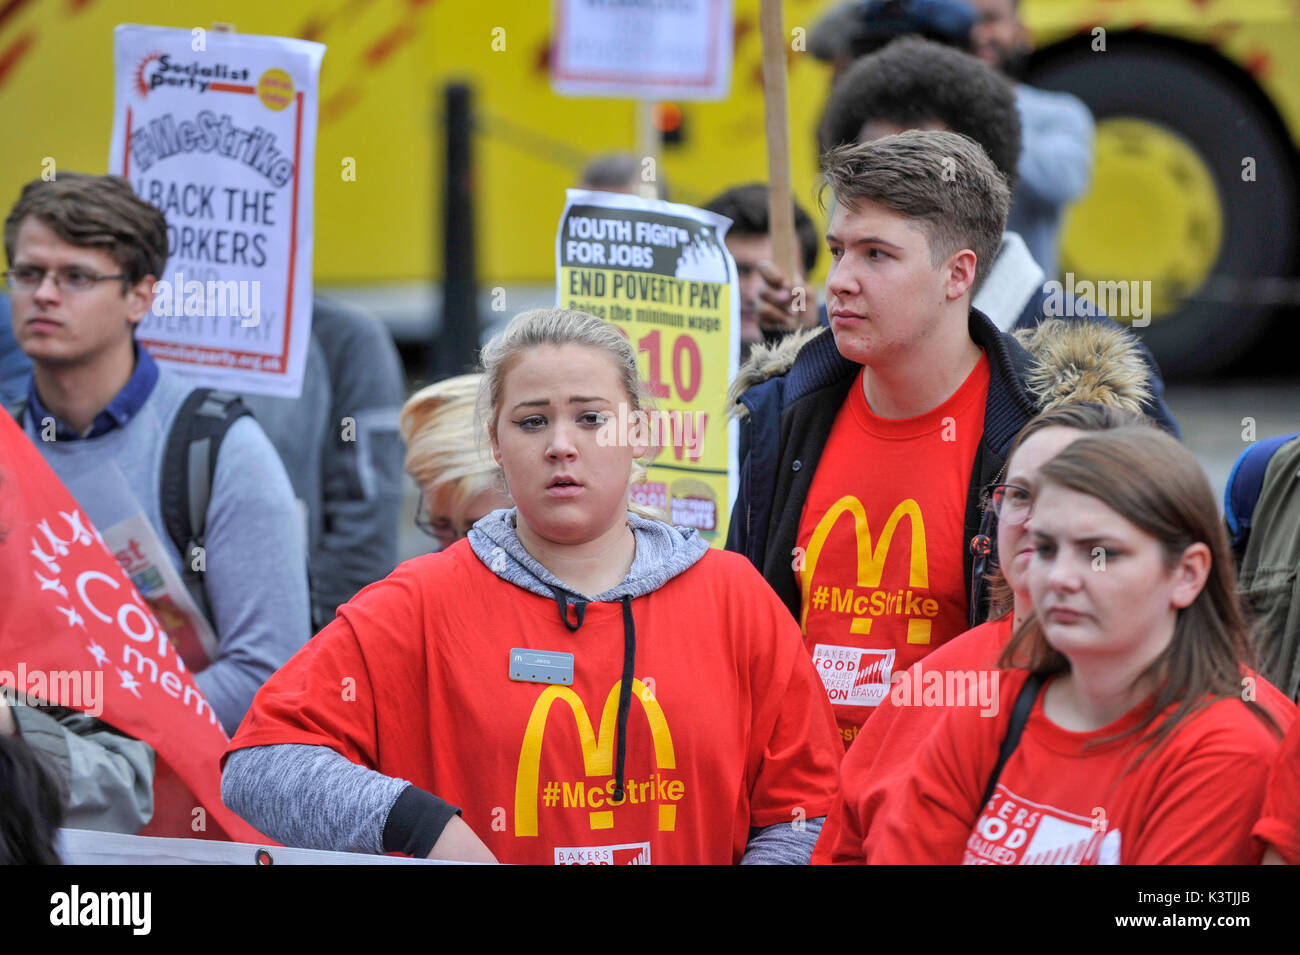 London, UK.  4 September 2017.  McDonald's staff and members of the Bakers Food and Allied Workers Union (BFAWU) attend a rally outside the Houses of Parliament in solidarity with McDonald's staff in Cambridge and Crayford who have gone on strike demanding an end to zero hours contracts and a minimum wage of GBP10 per hour.  Credit: Stephen Chung / Alamy Live News Stock Photo